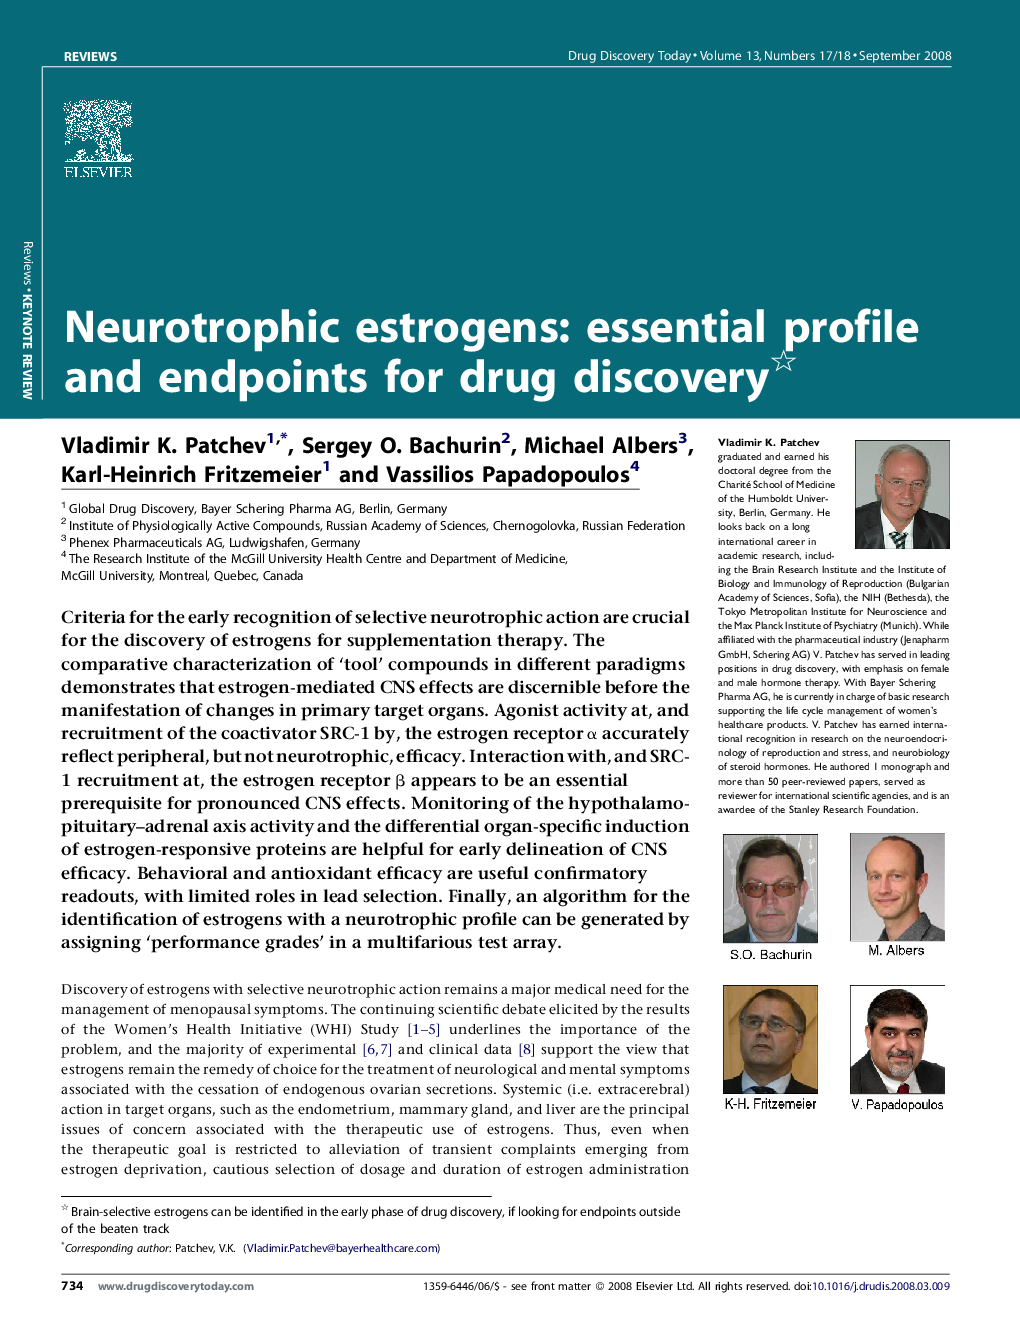 Neurotrophic estrogens: essential profile and endpoints for drug discovery